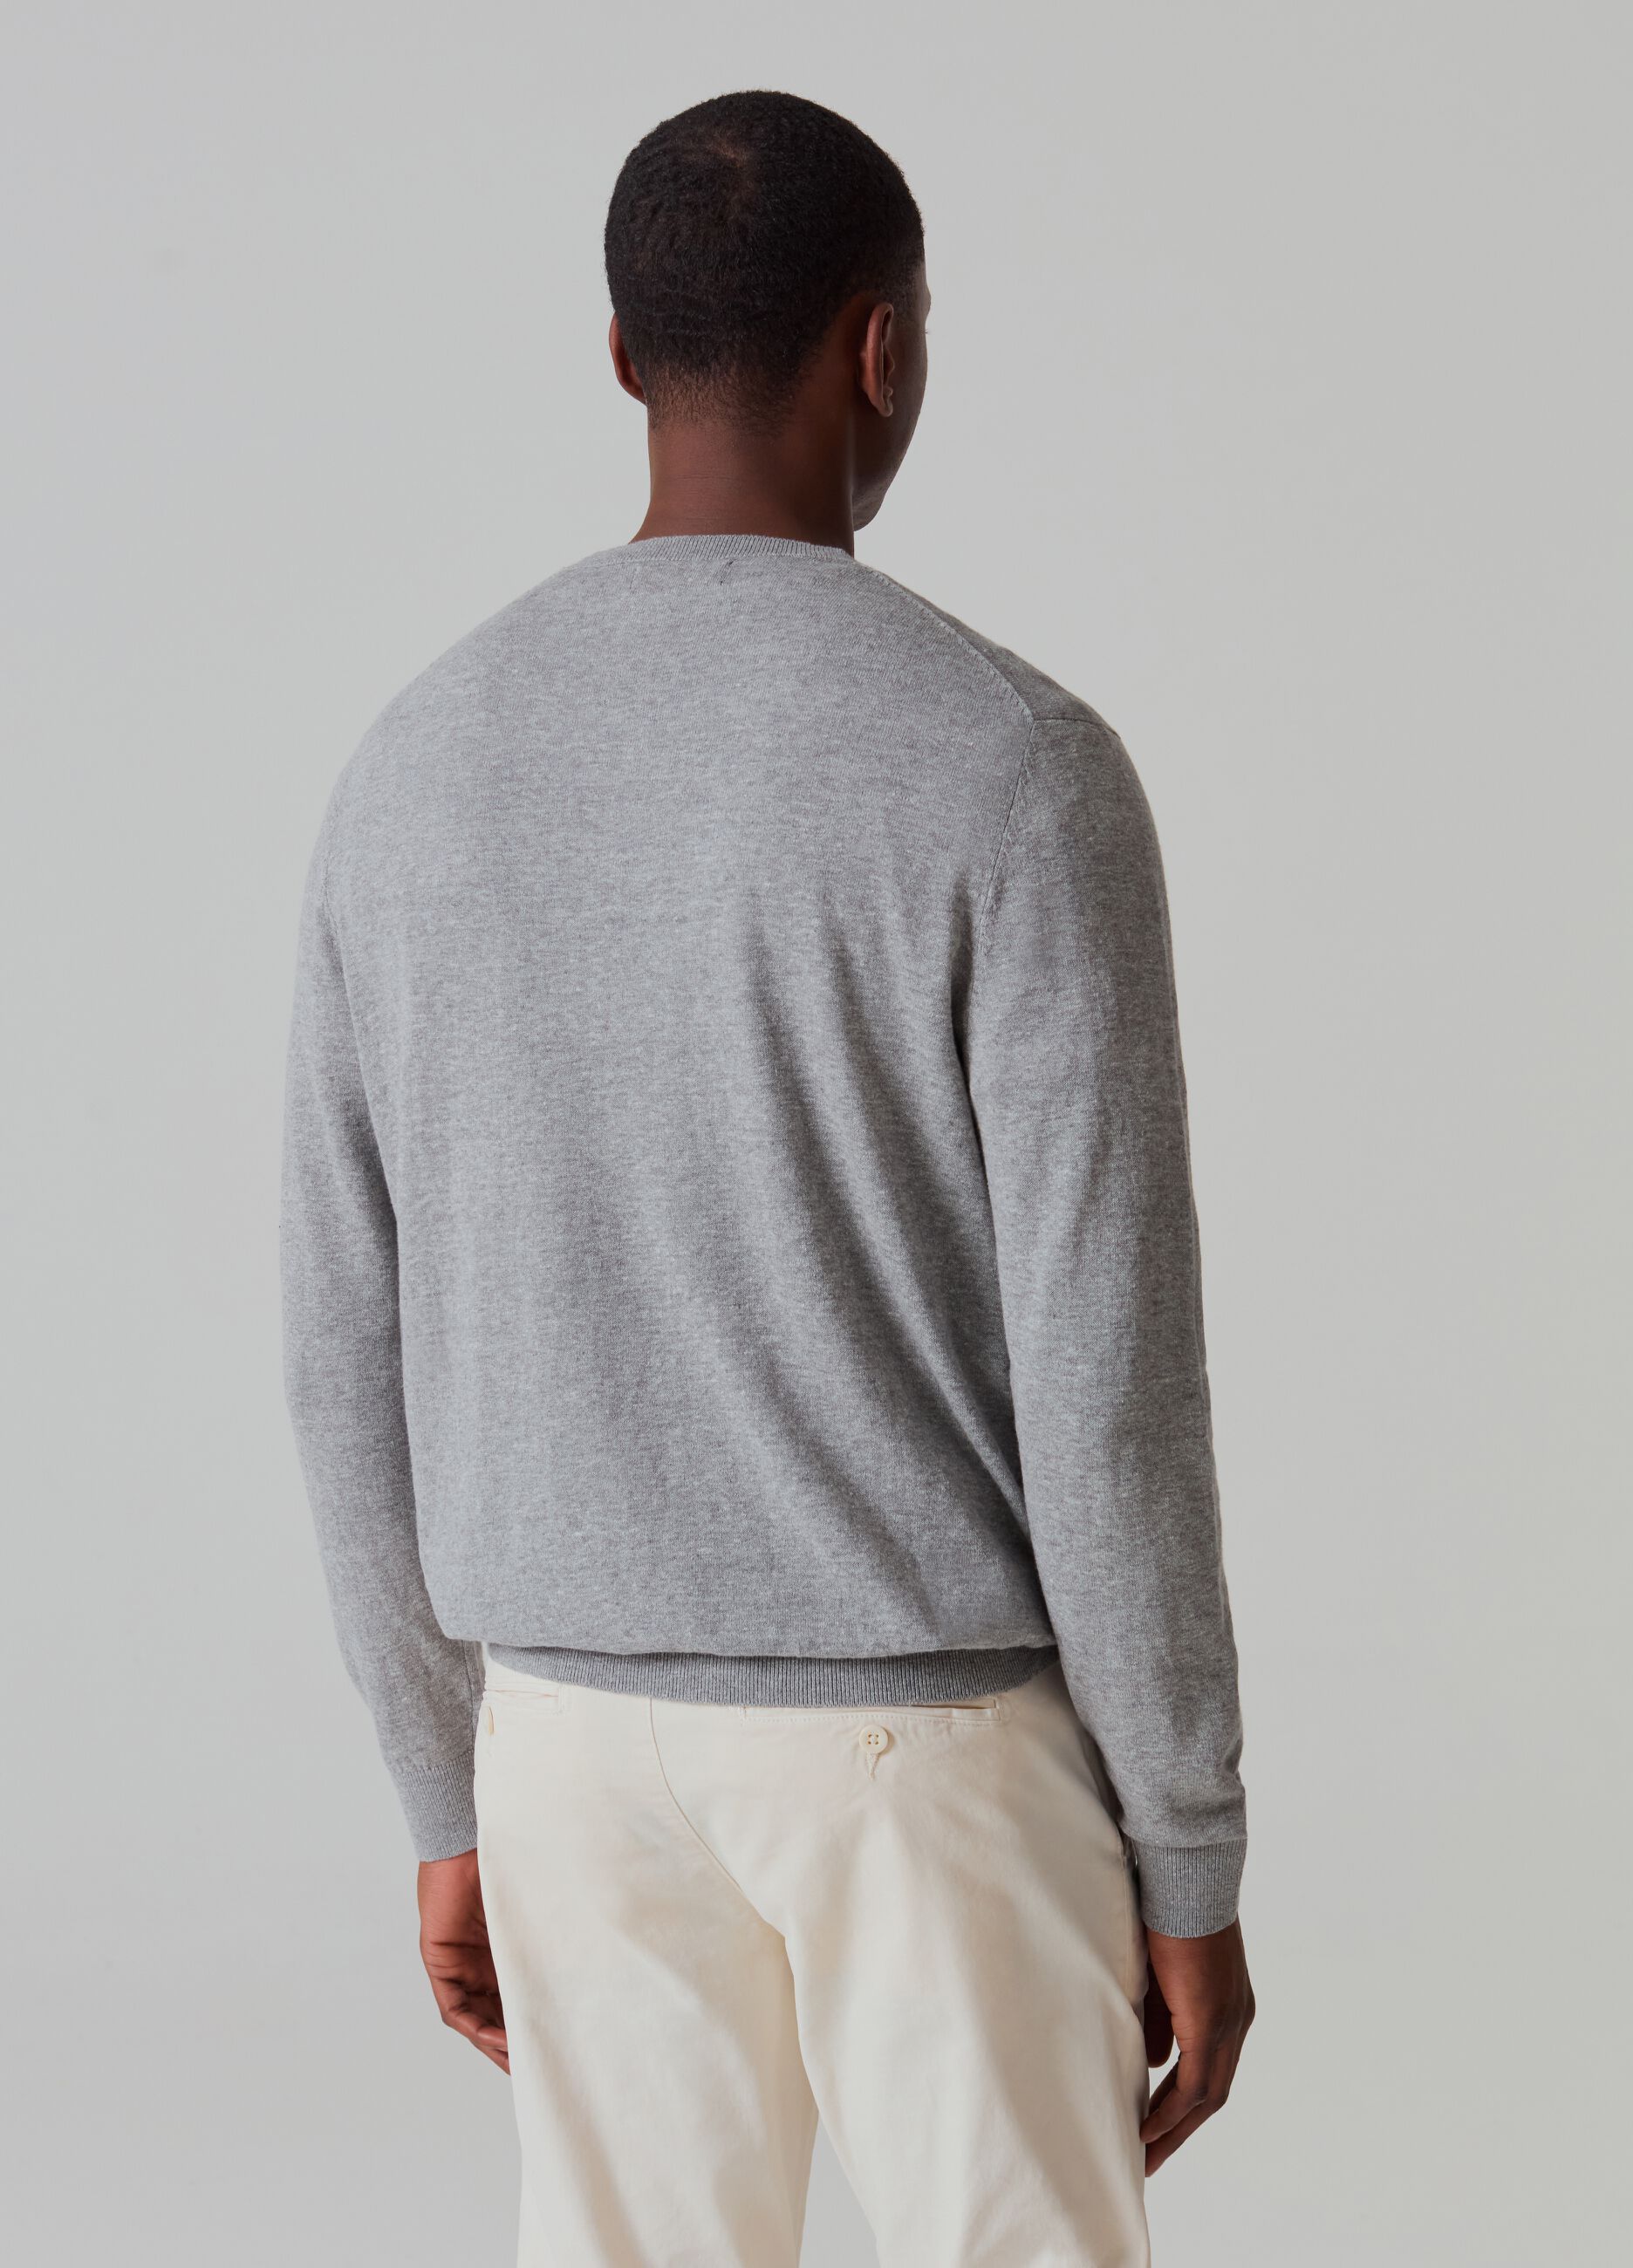 Cotton and linen pullover with round neck